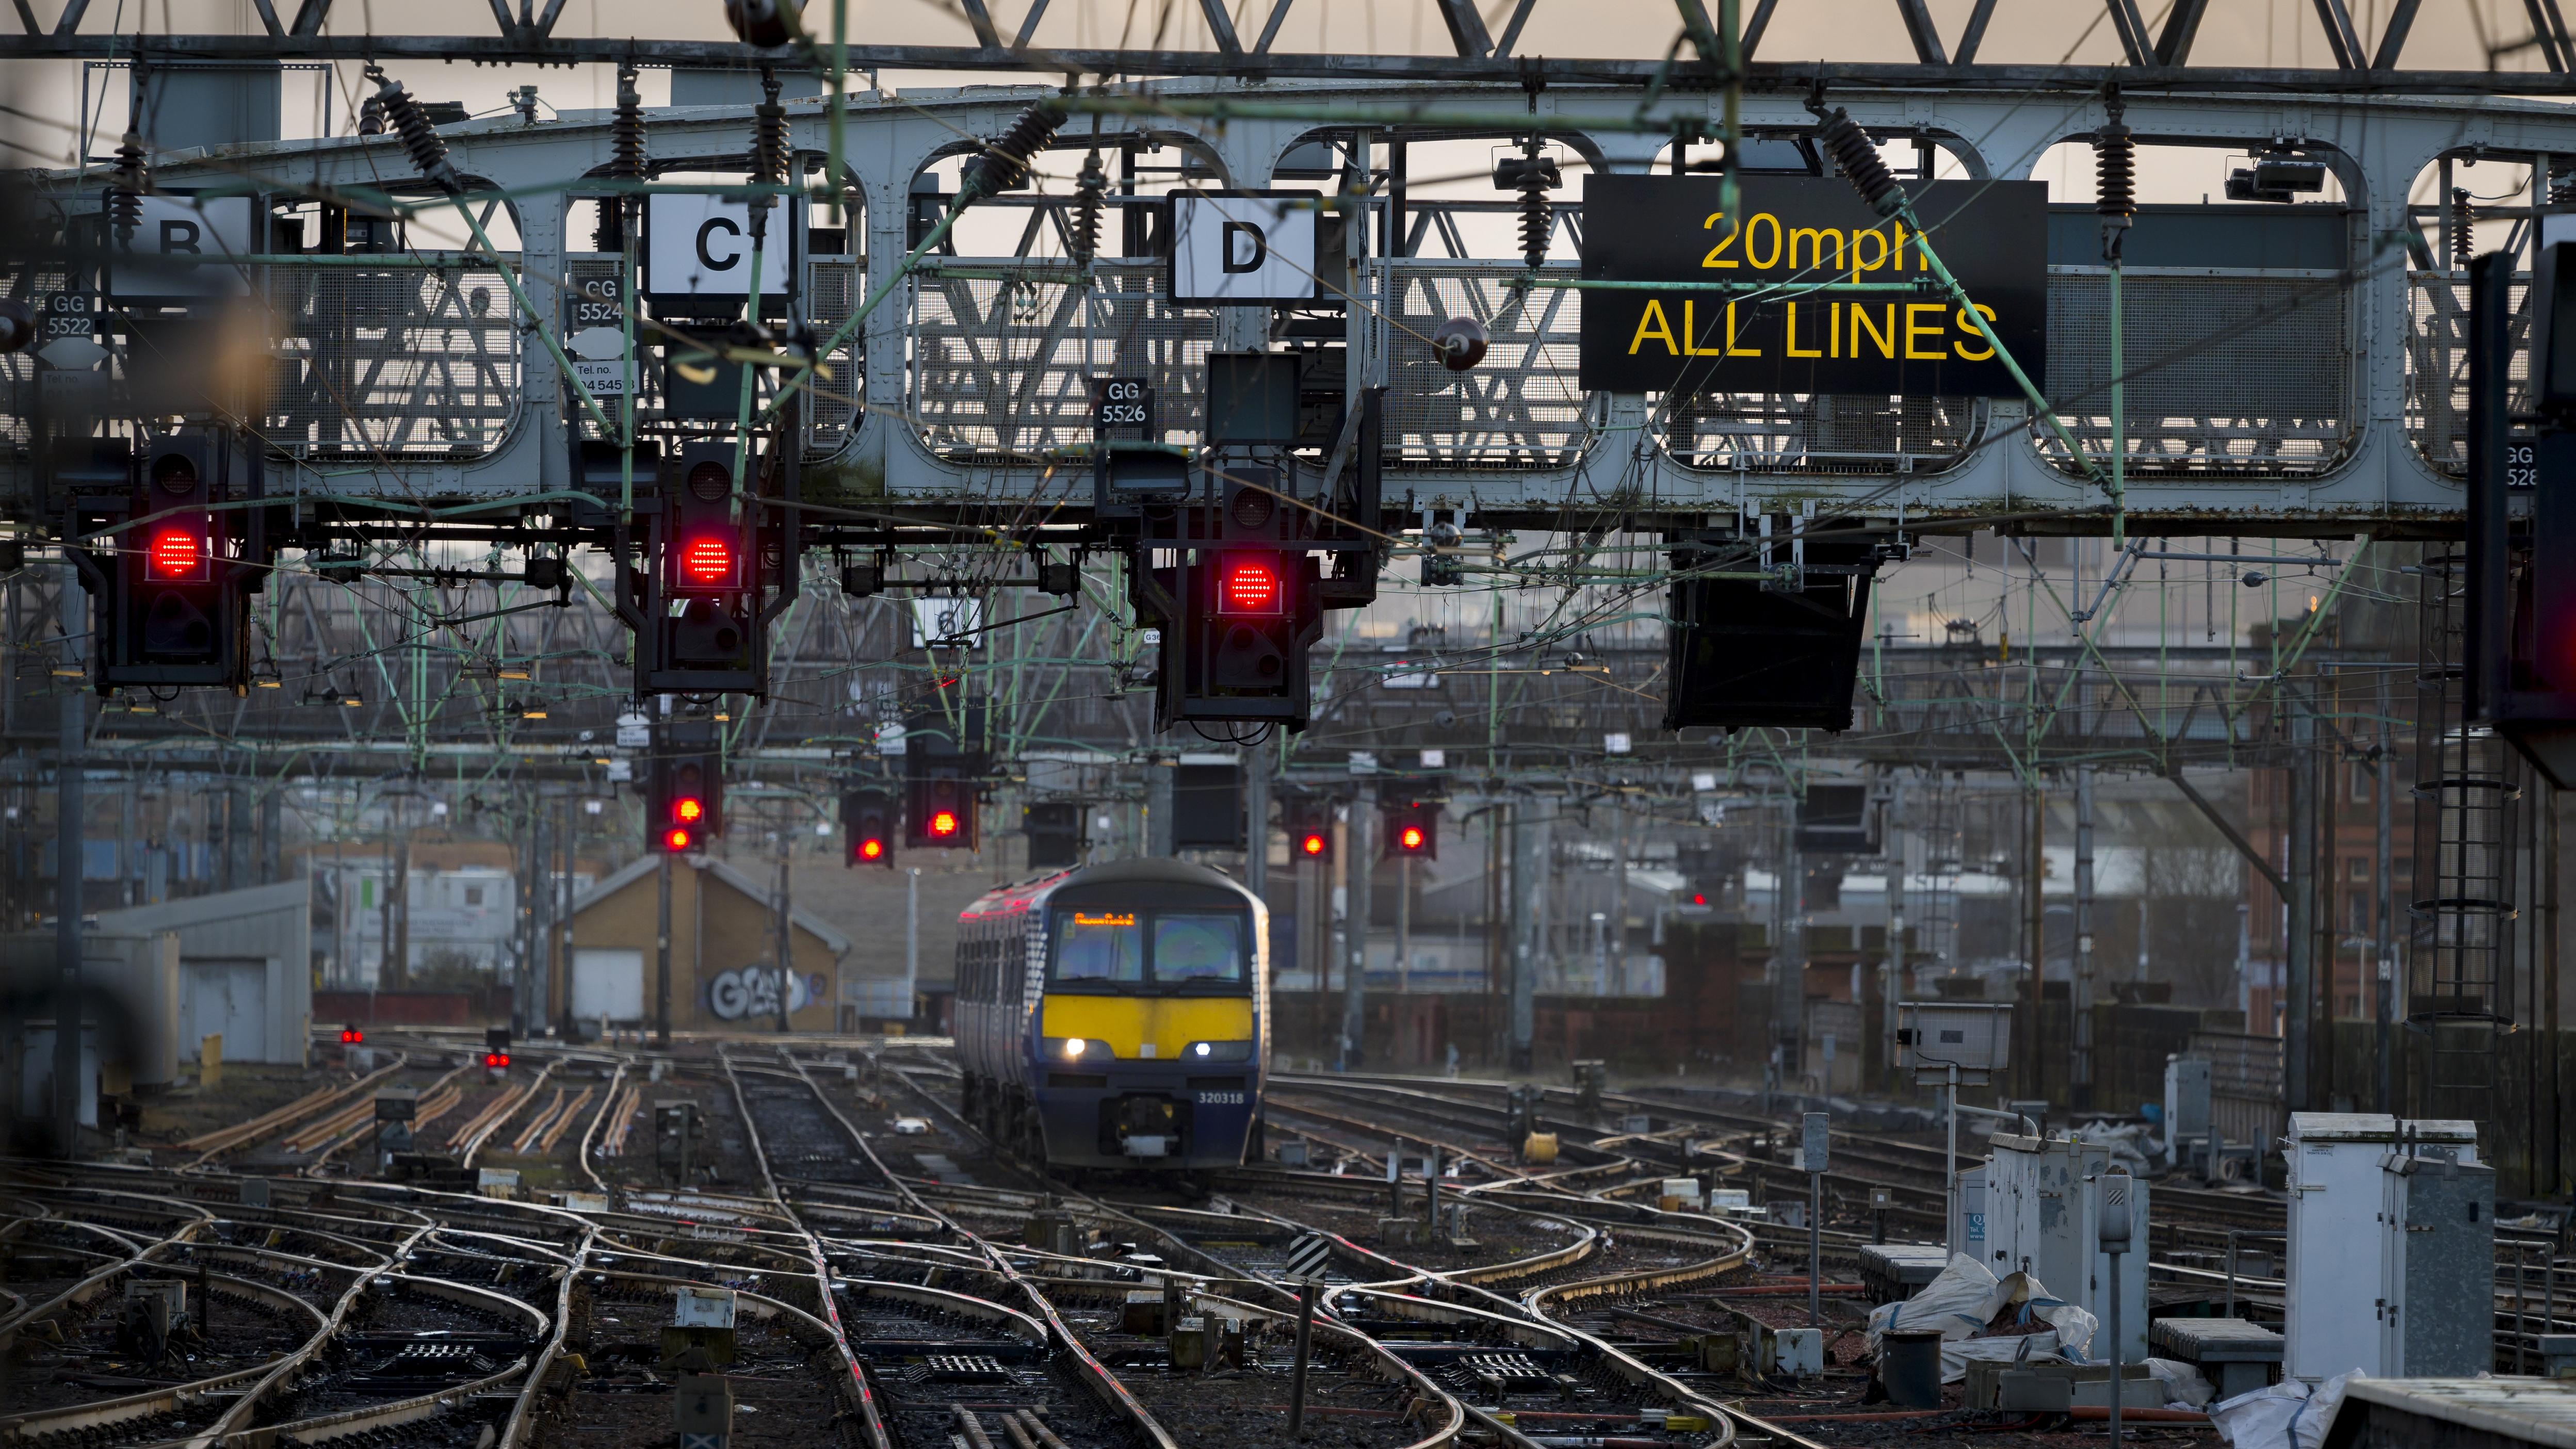 An image of a ScotRail train pulling into a train station